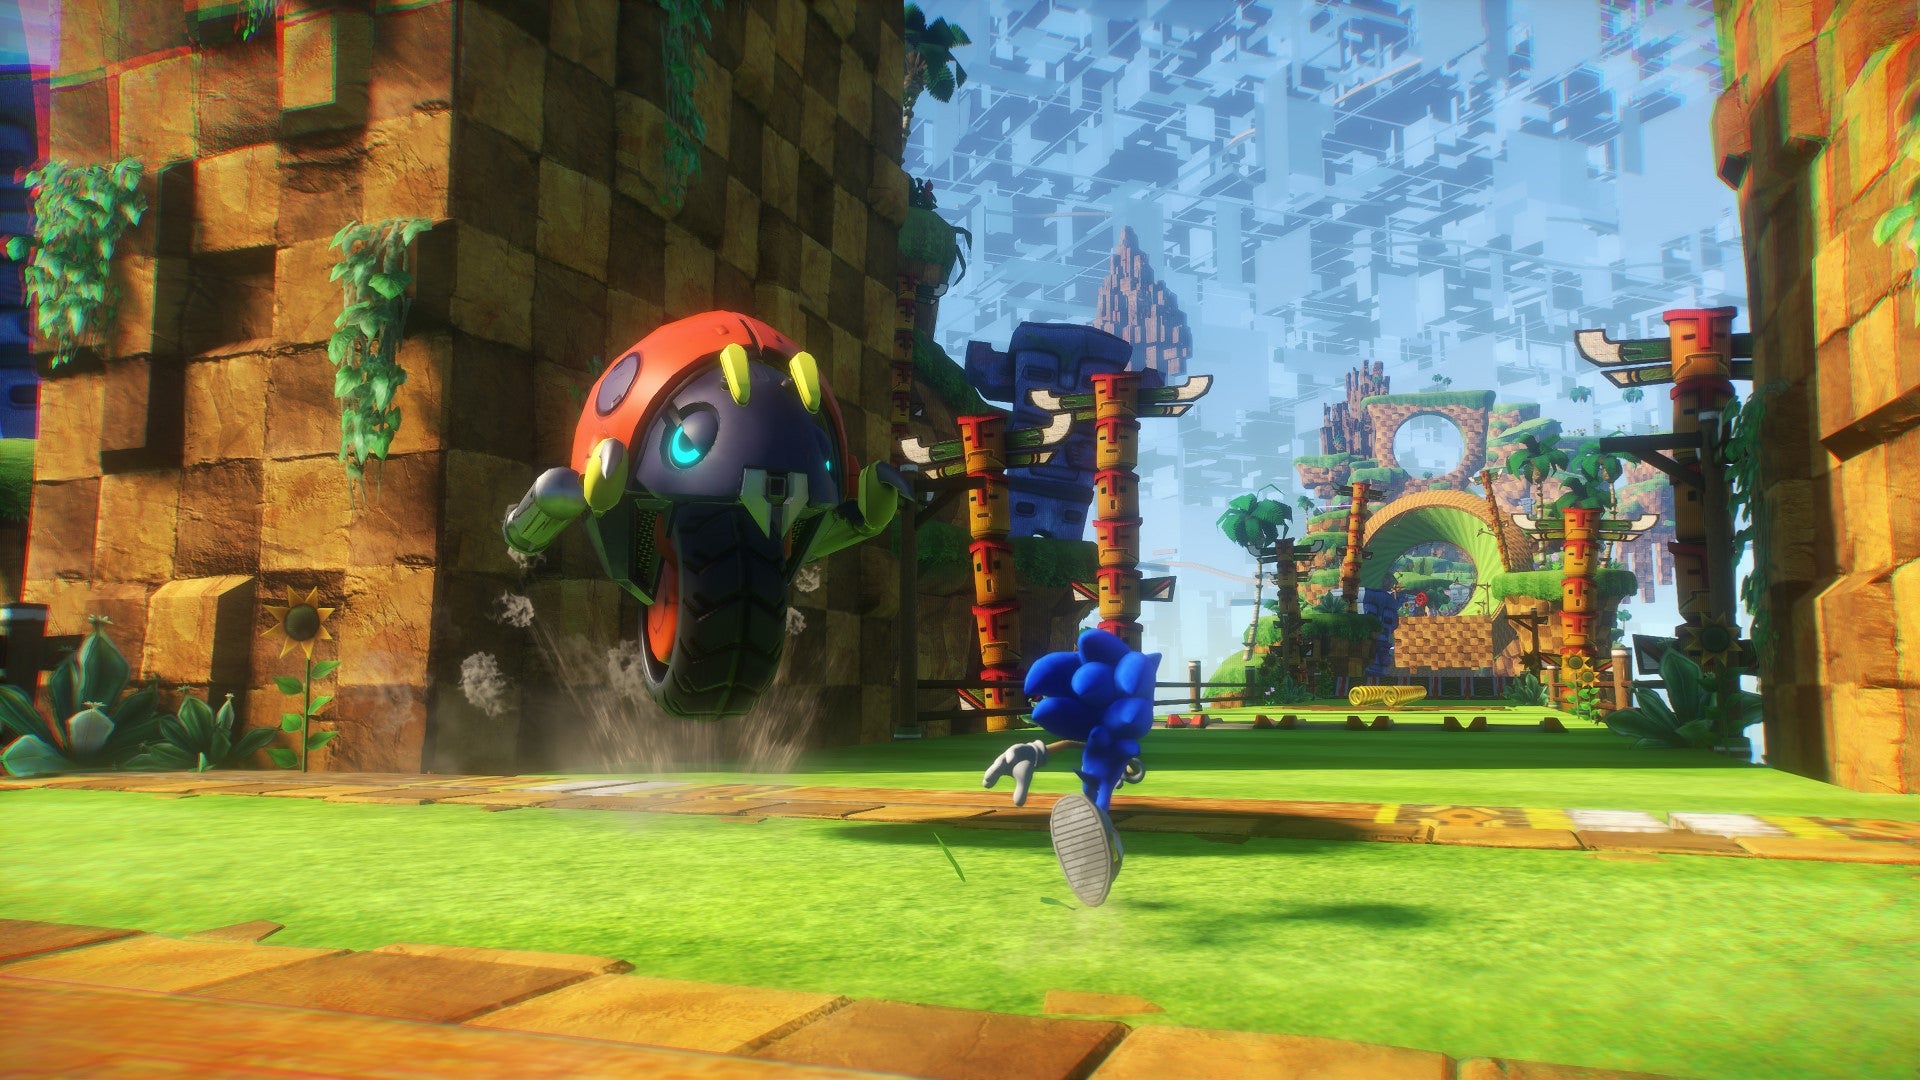 Sonic blasts through a Cyberspace level modelled after Green Zone in Sonic Frontiers.